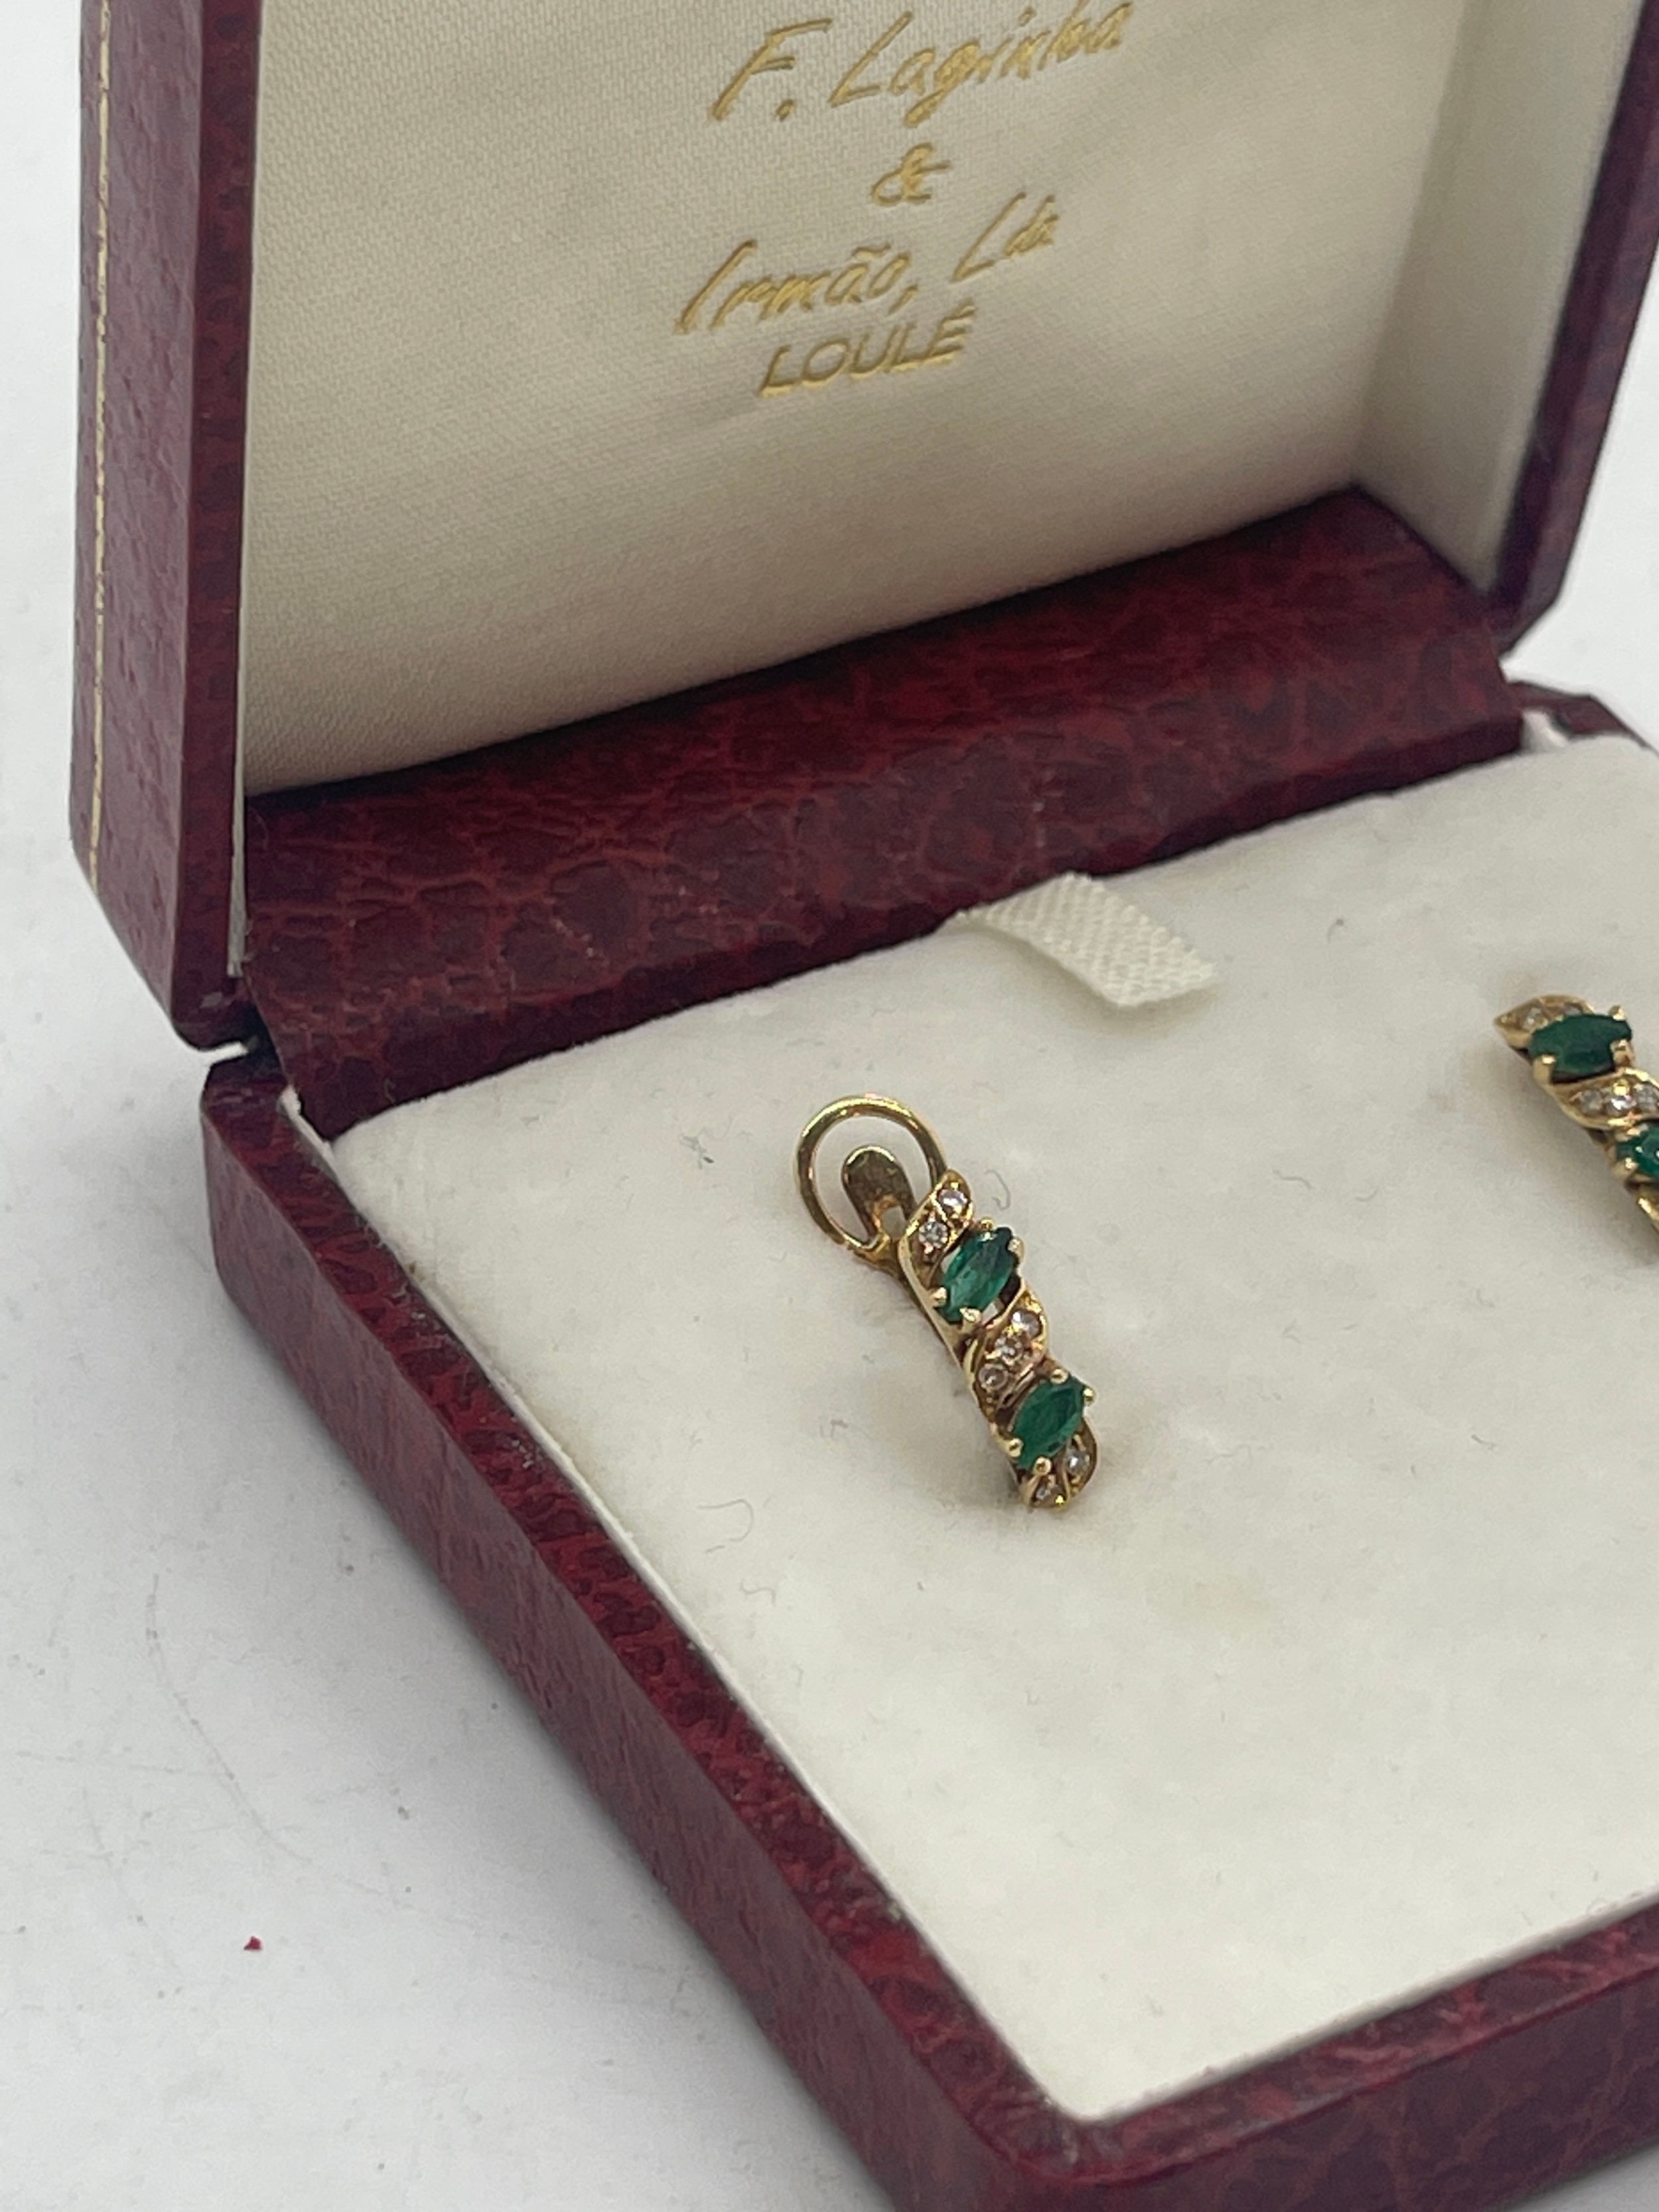 Pair of 18ct diamond and emerald earrings 2.9 grams - Image 5 of 7